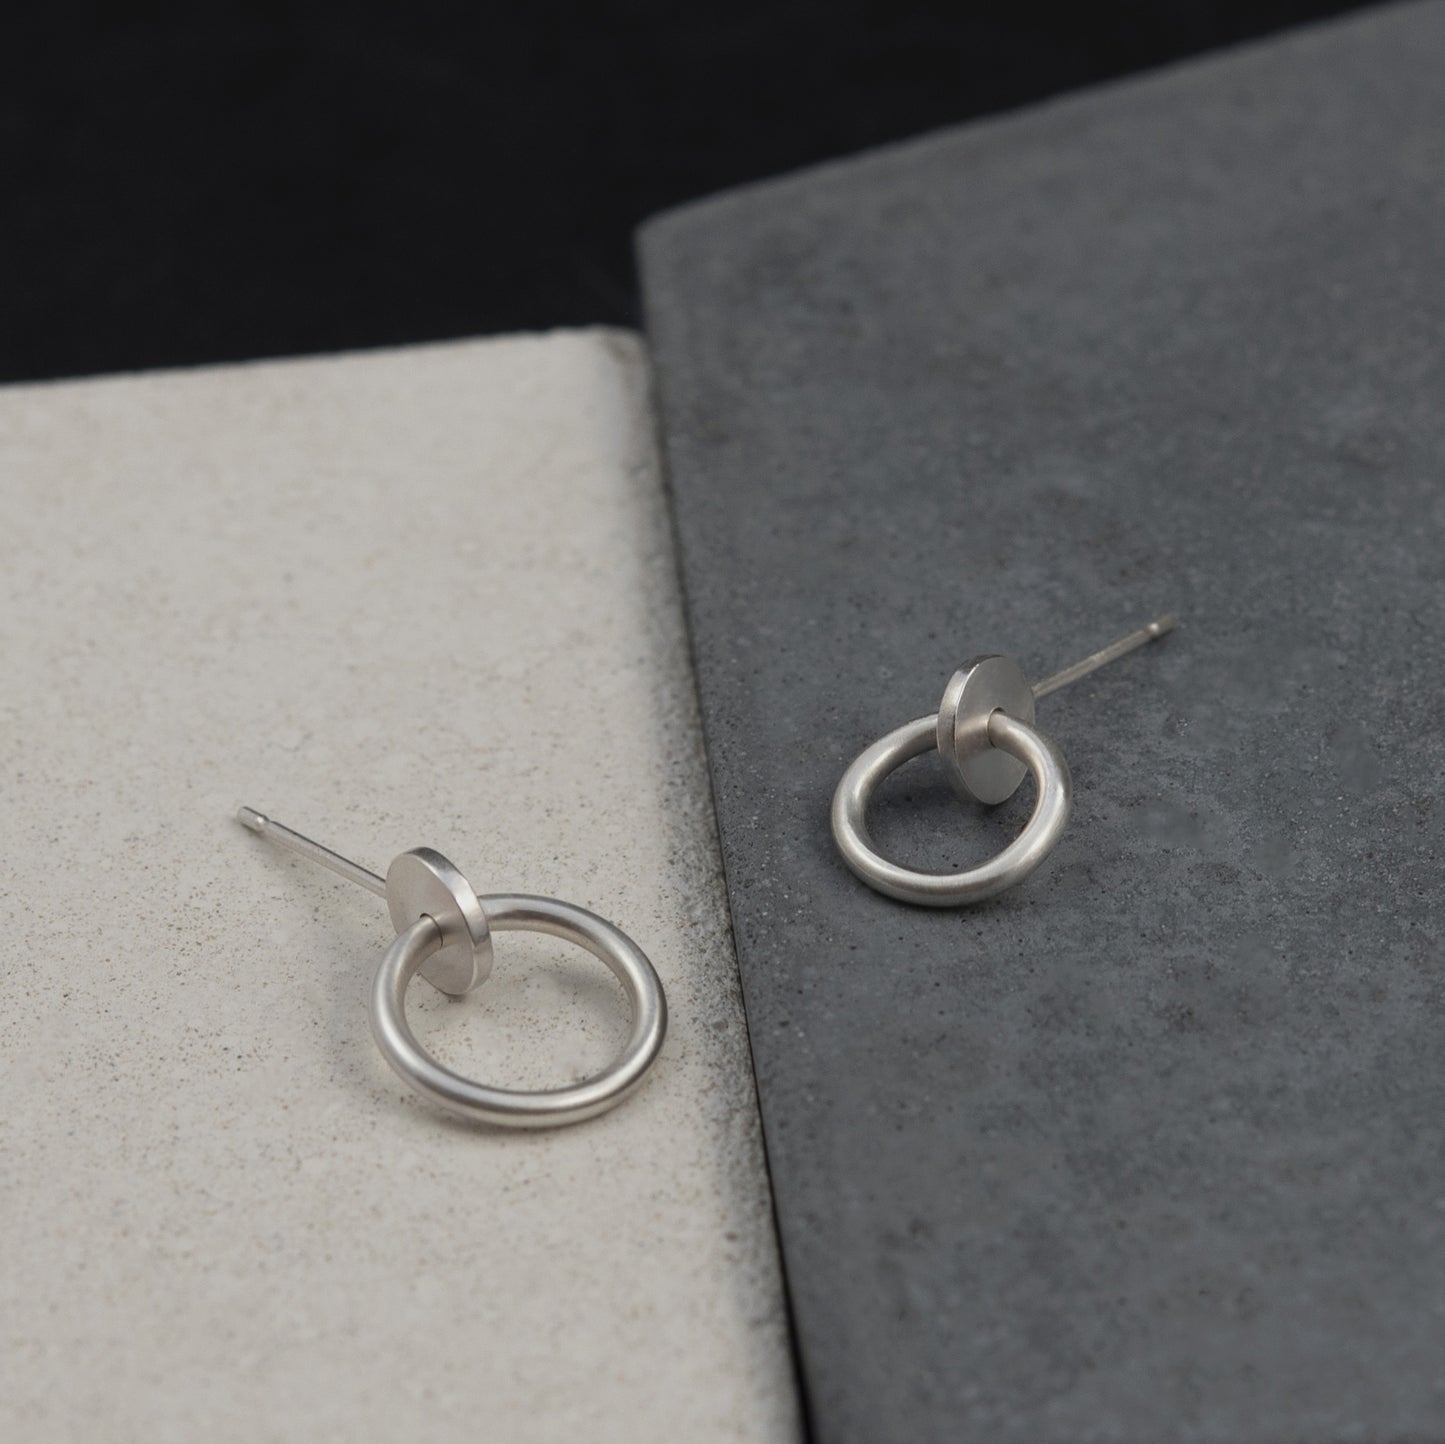 Pair of silver studs handmade by AgJc duo